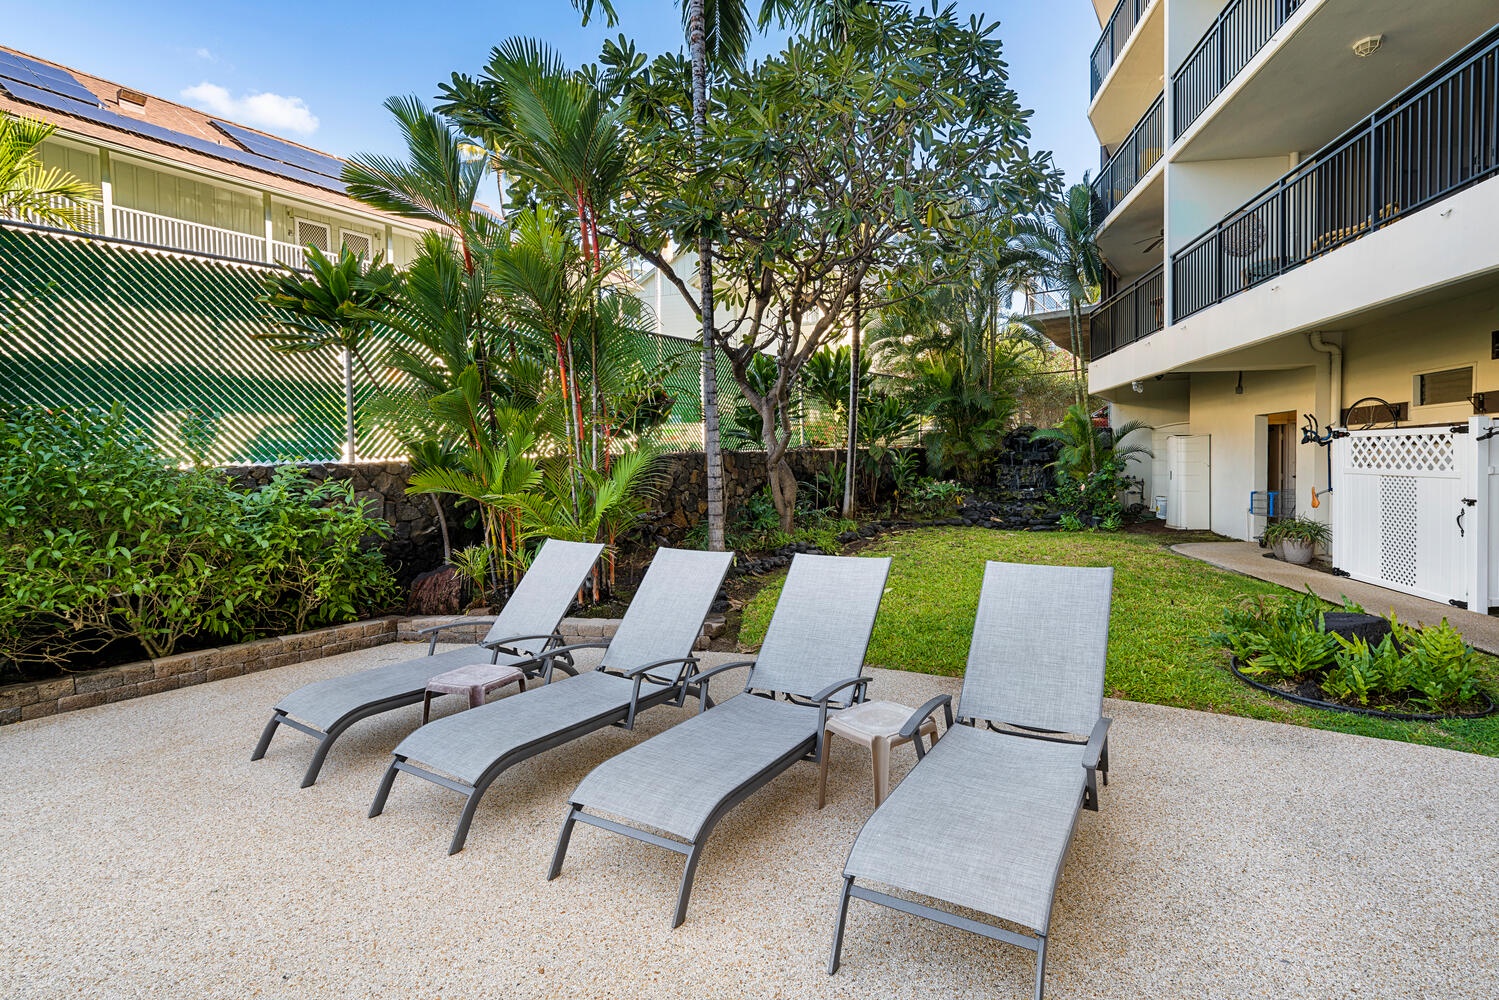 Kailua Kona Vacation Rentals, Kona Alii 302 - Poolside loungers available for swimmers.